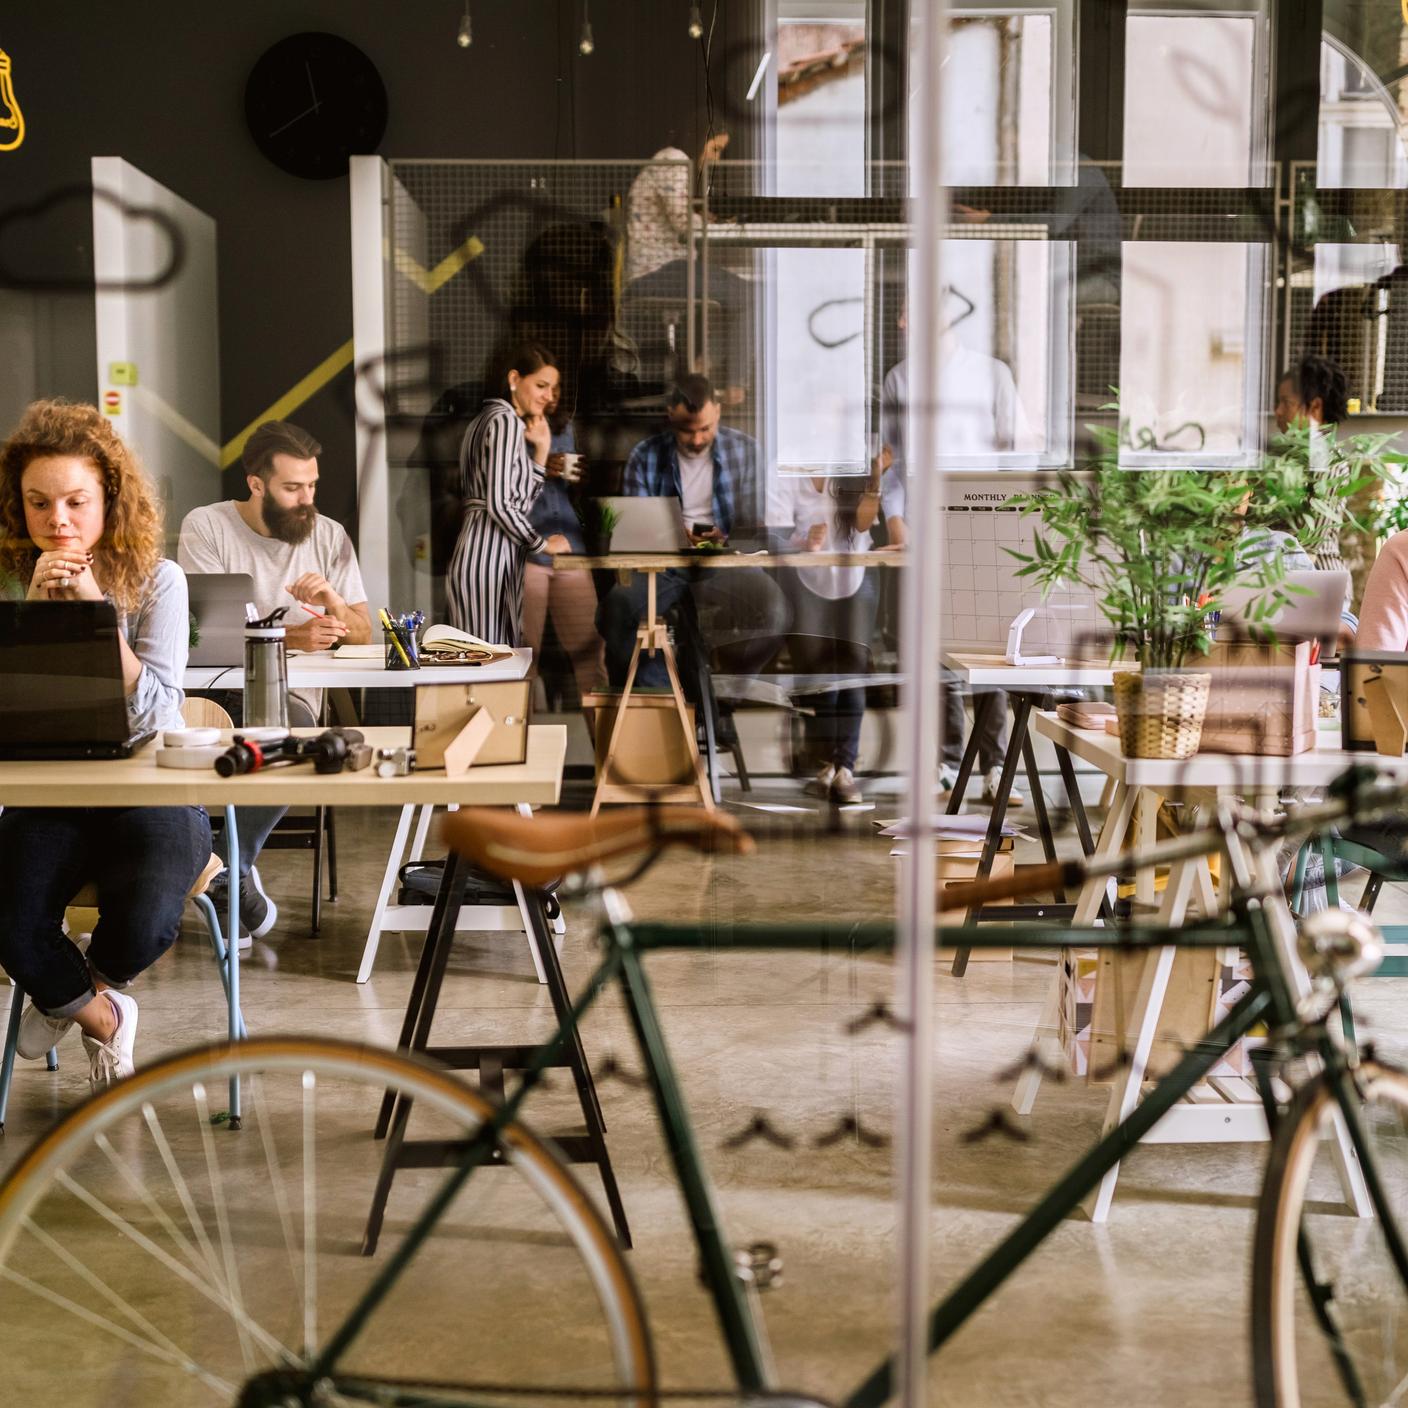 SGK Put Sustainability at the Heart of Transformation - Bicycle in co-working space